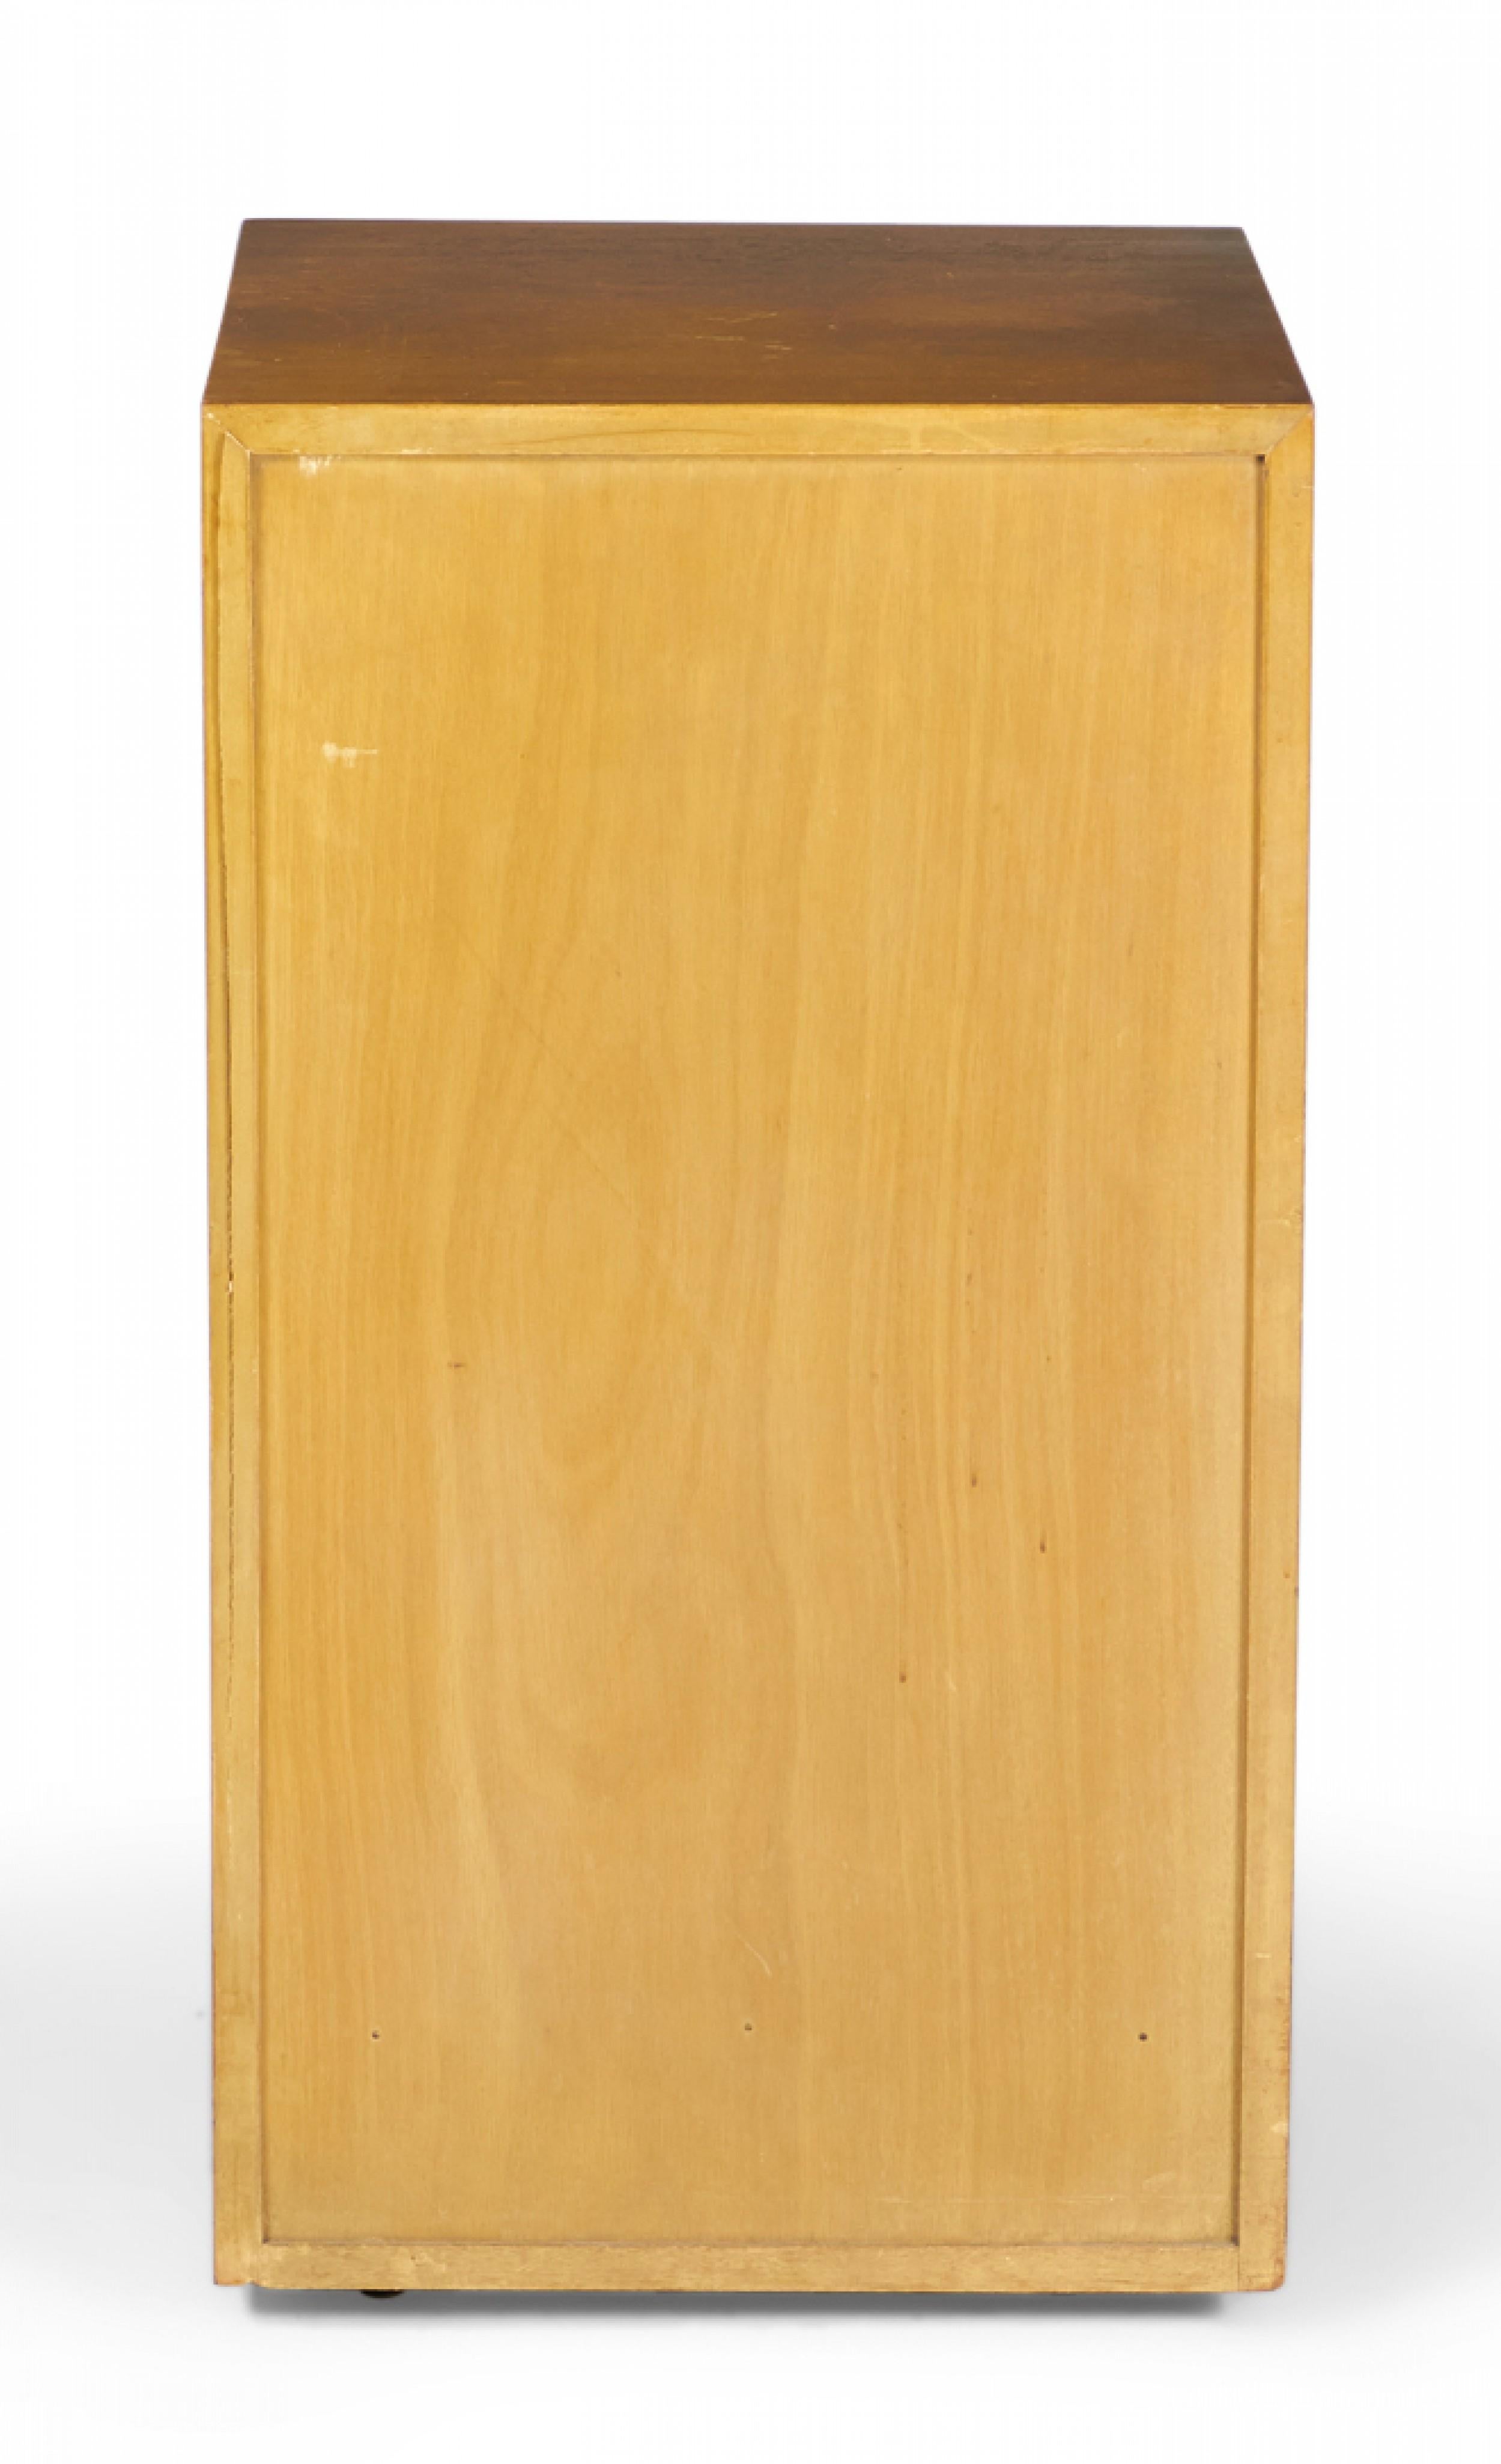 Widdicomb Modern Blond Maple Tall Single-Door Cabinet / Nightstand In Good Condition For Sale In New York, NY